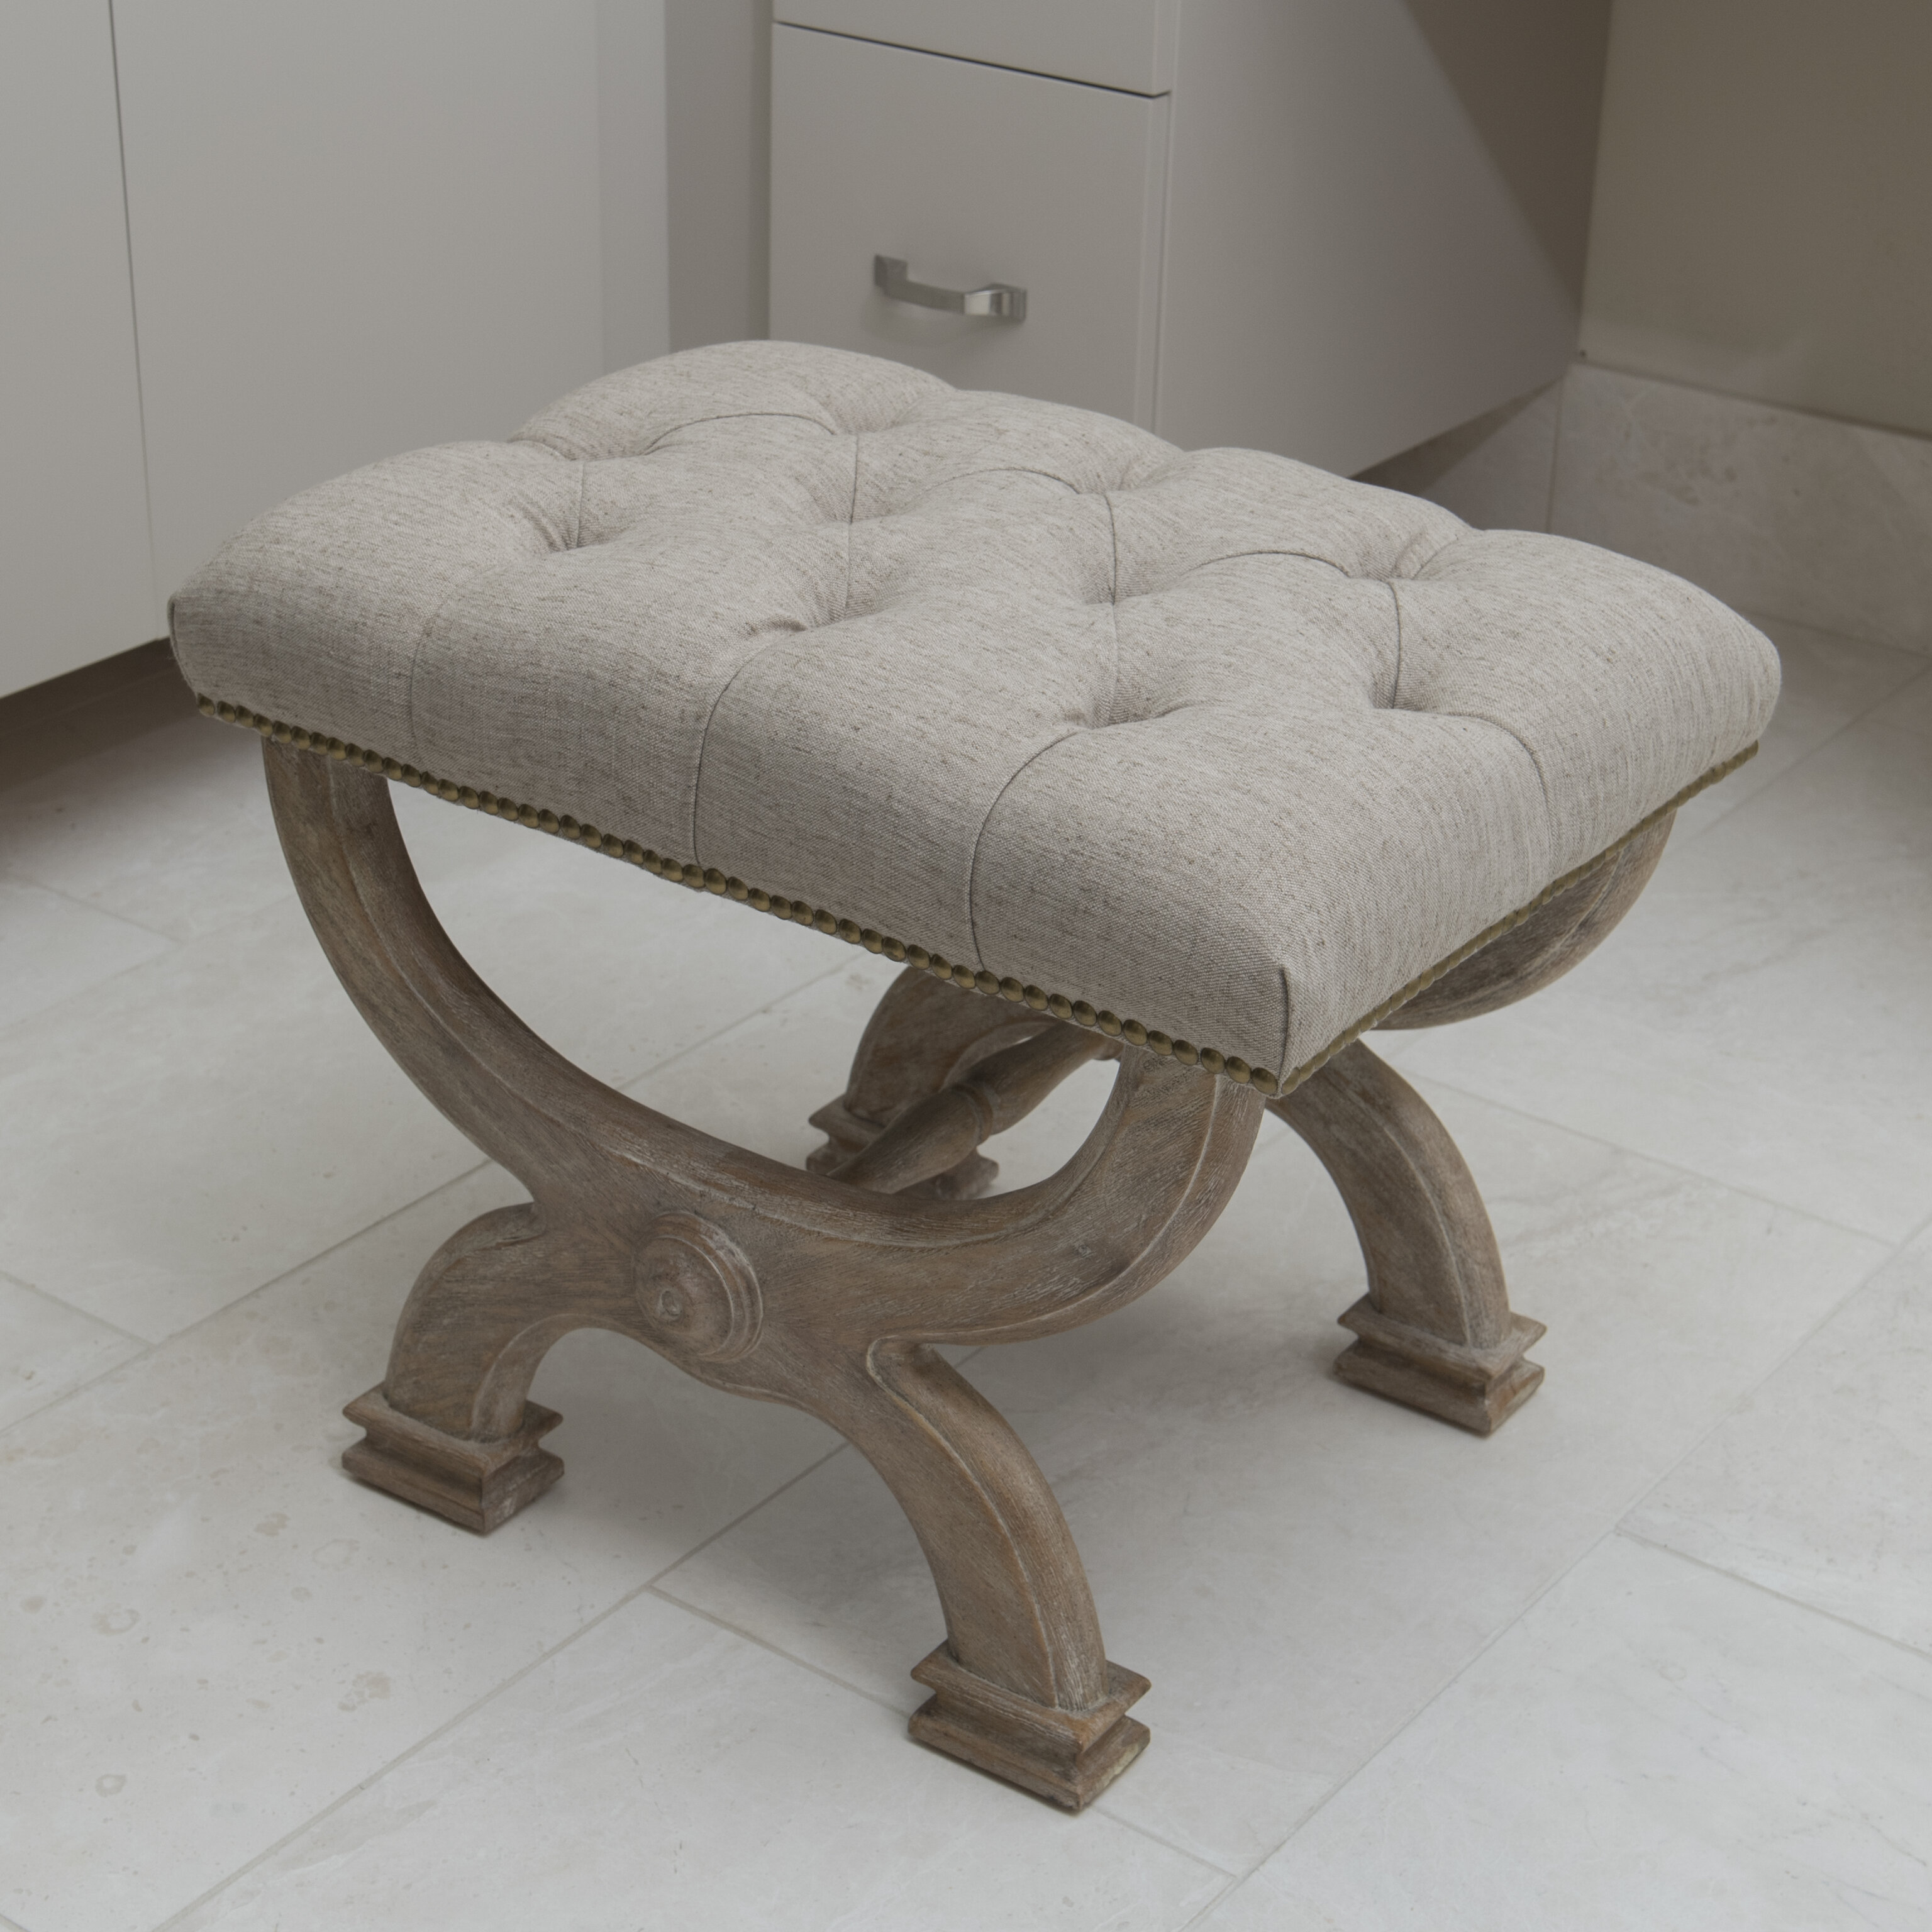 Details about   Natural Wood VANITY STOOL Hand Carved Home Bedroom Living Room Furniture Seat 